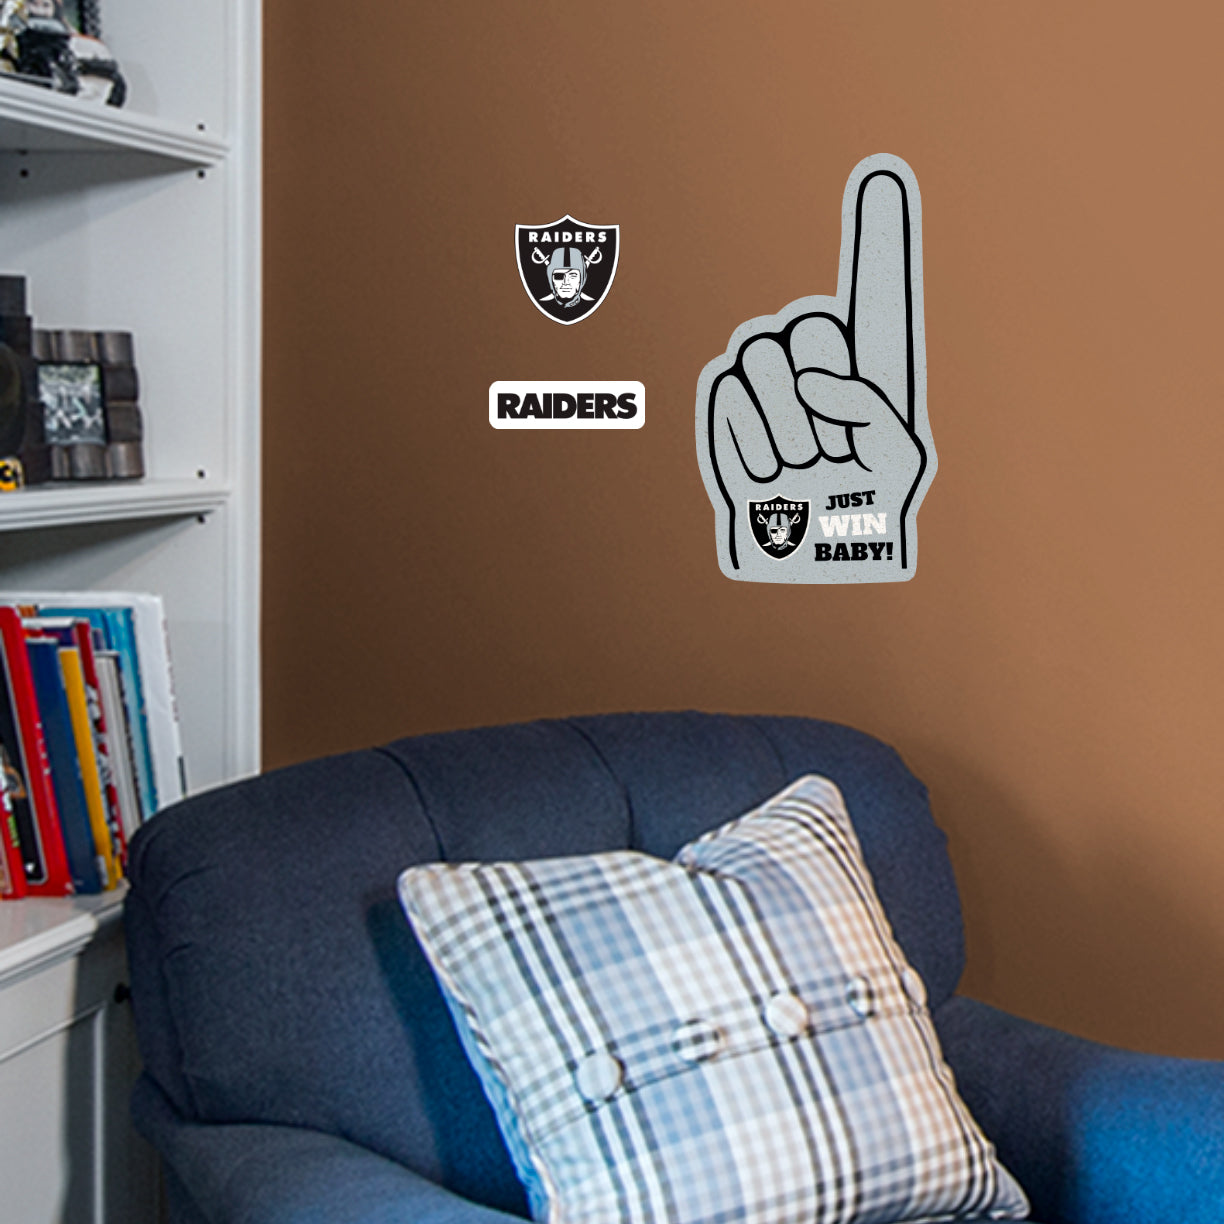 Las Vegas Raiders: Foam Finger - Officially Licensed NFL Removable Adhesive Decal